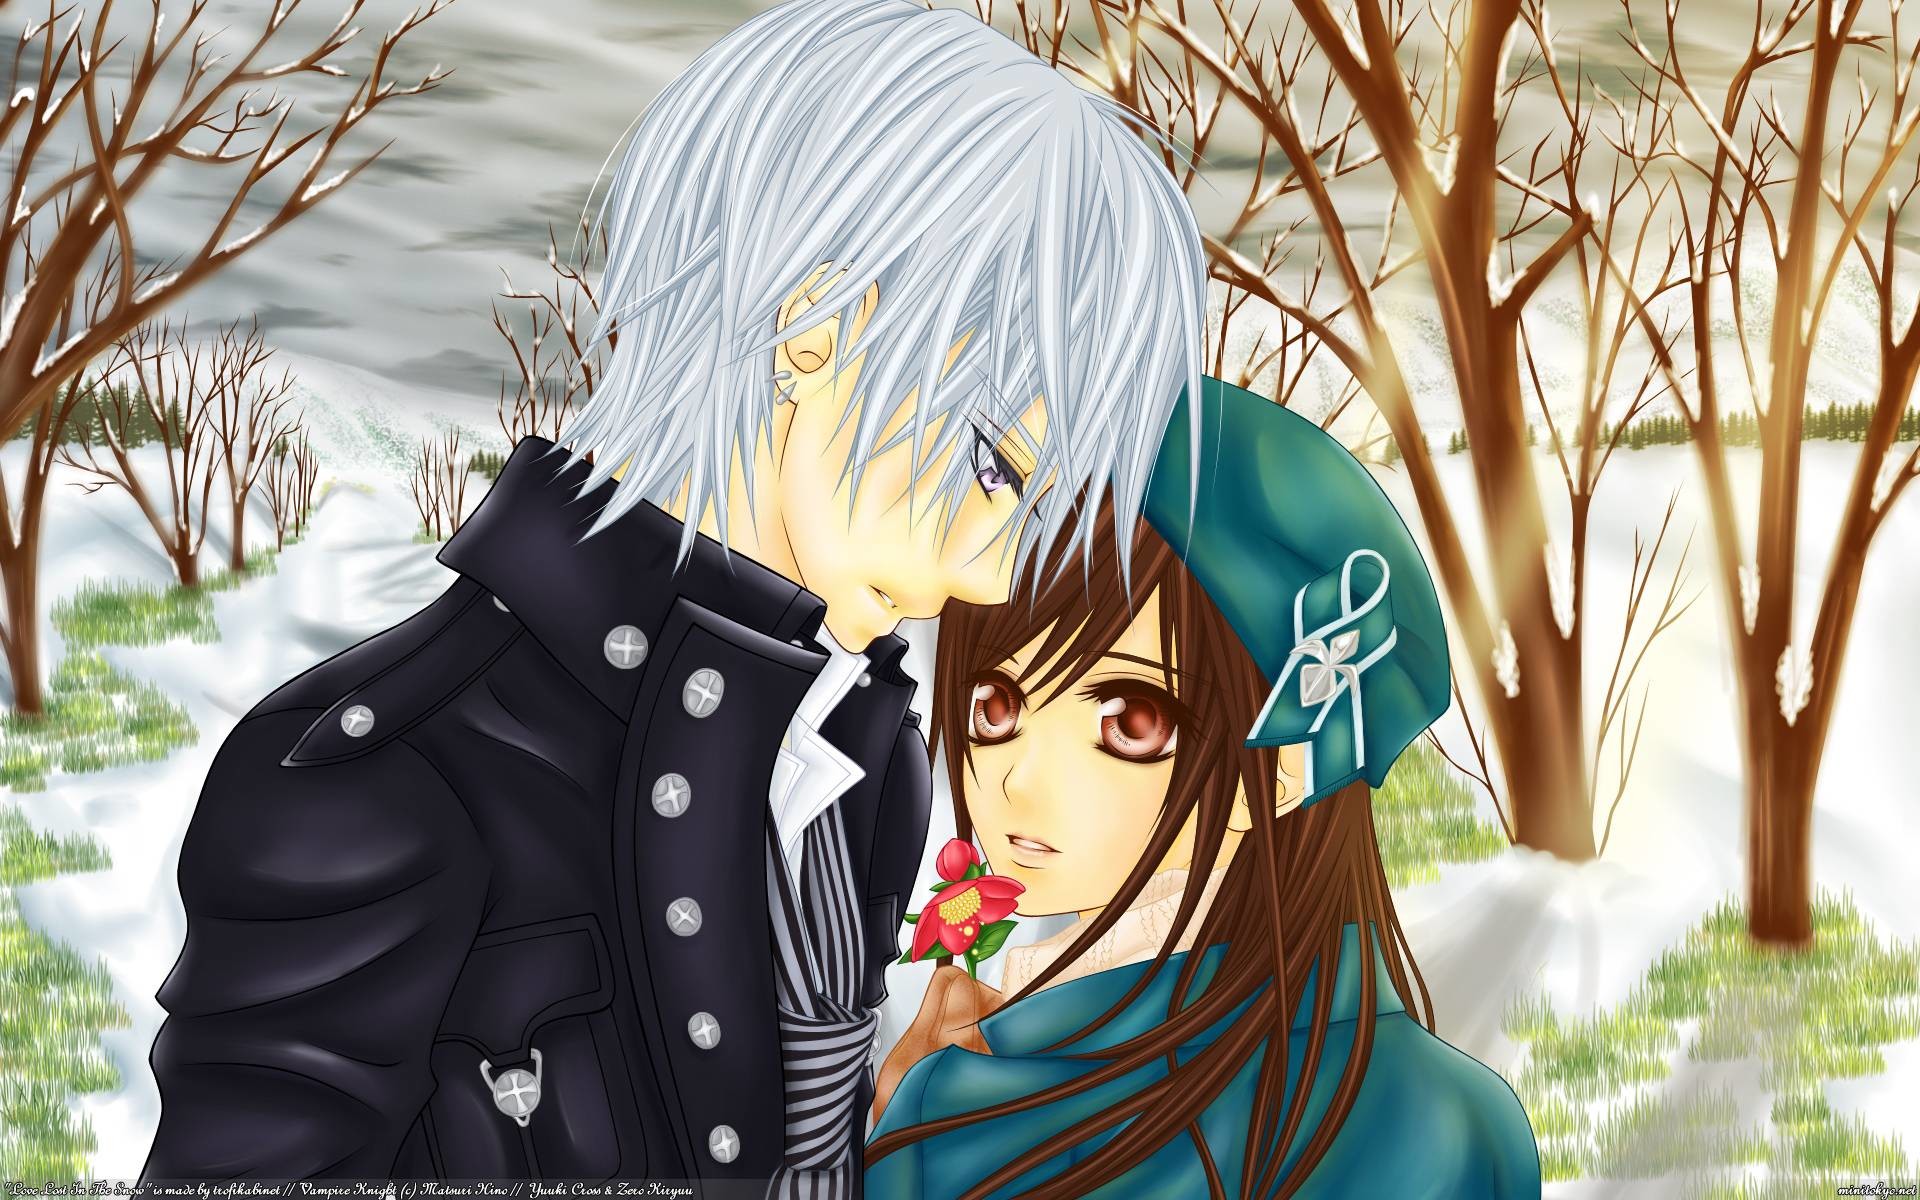 Romantic Anime Wallpapers (65+ pictures)